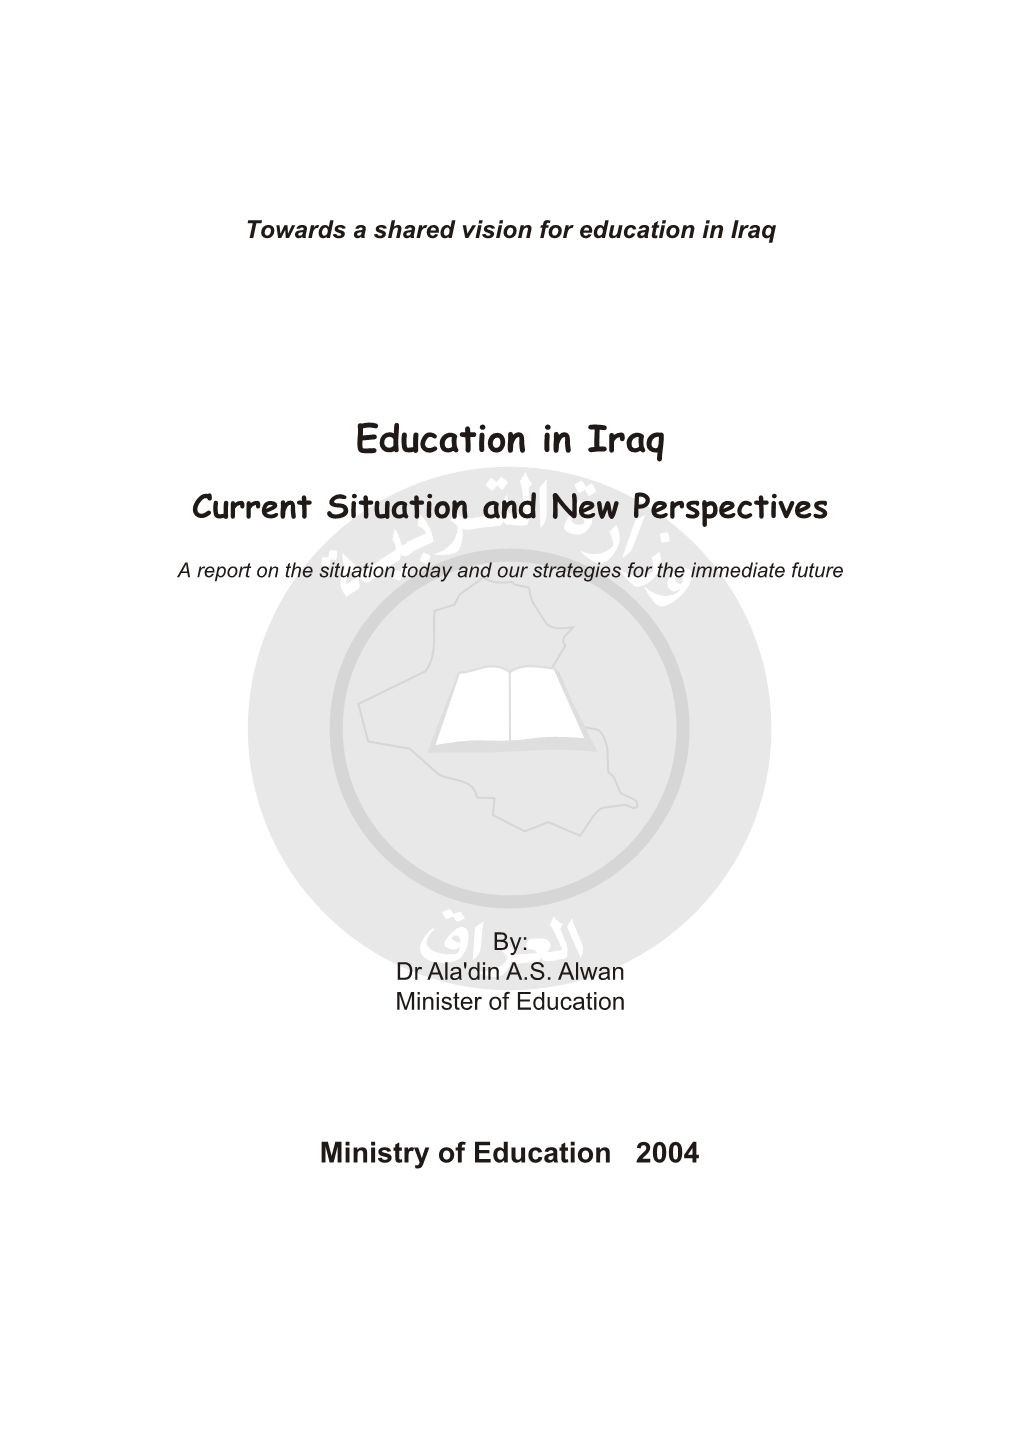 Education in Iraq: Current Situation and New Perspectives